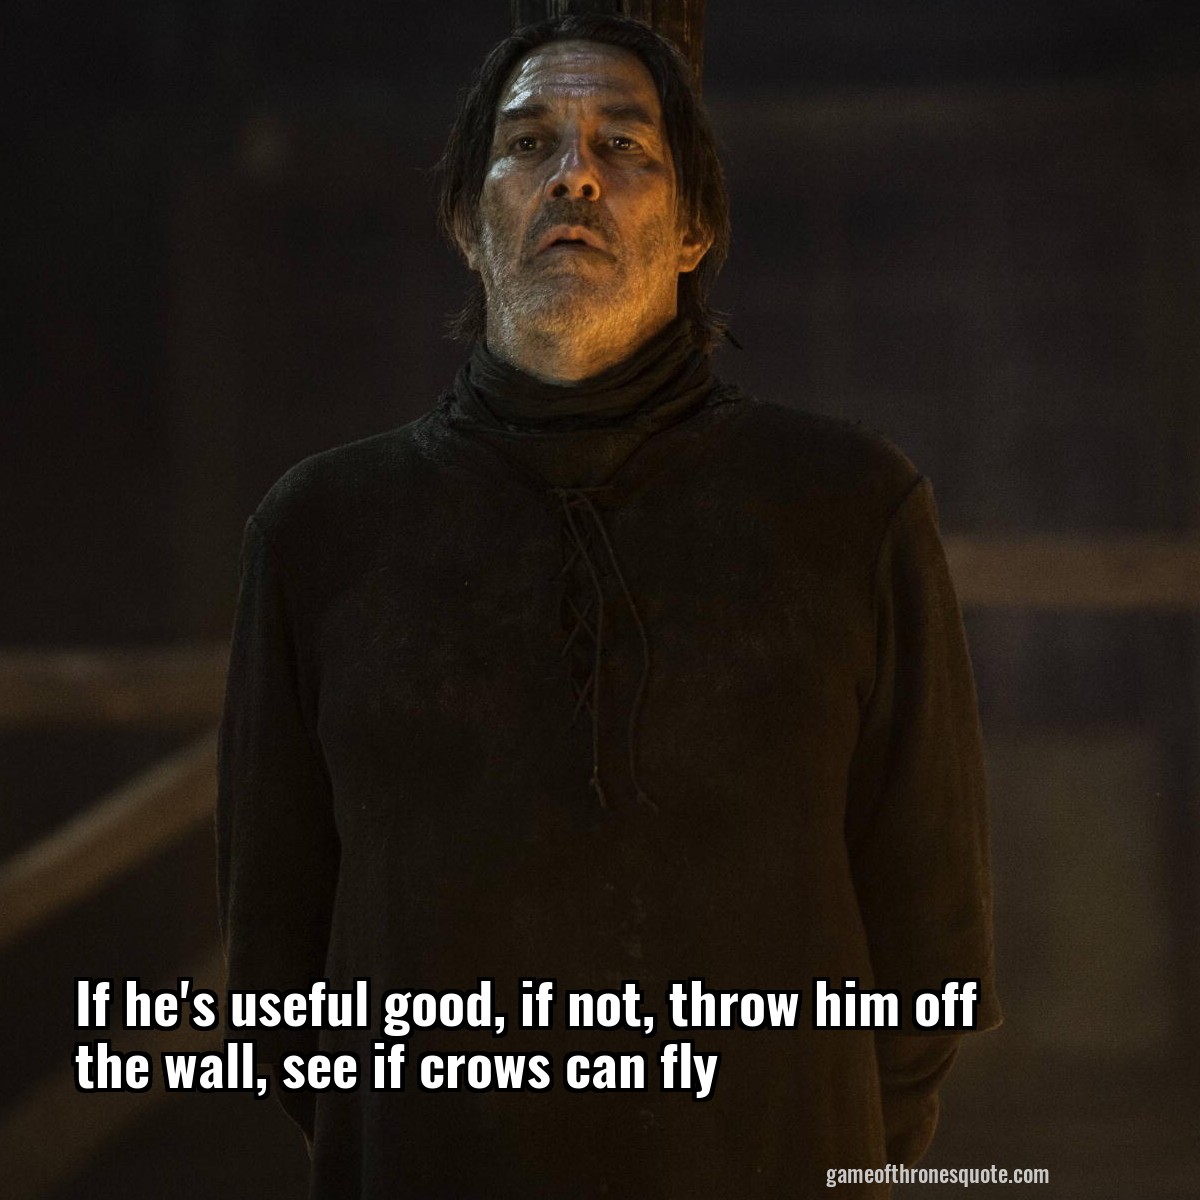 If he's useful good, if not, throw him off the wall, see if crows can fly